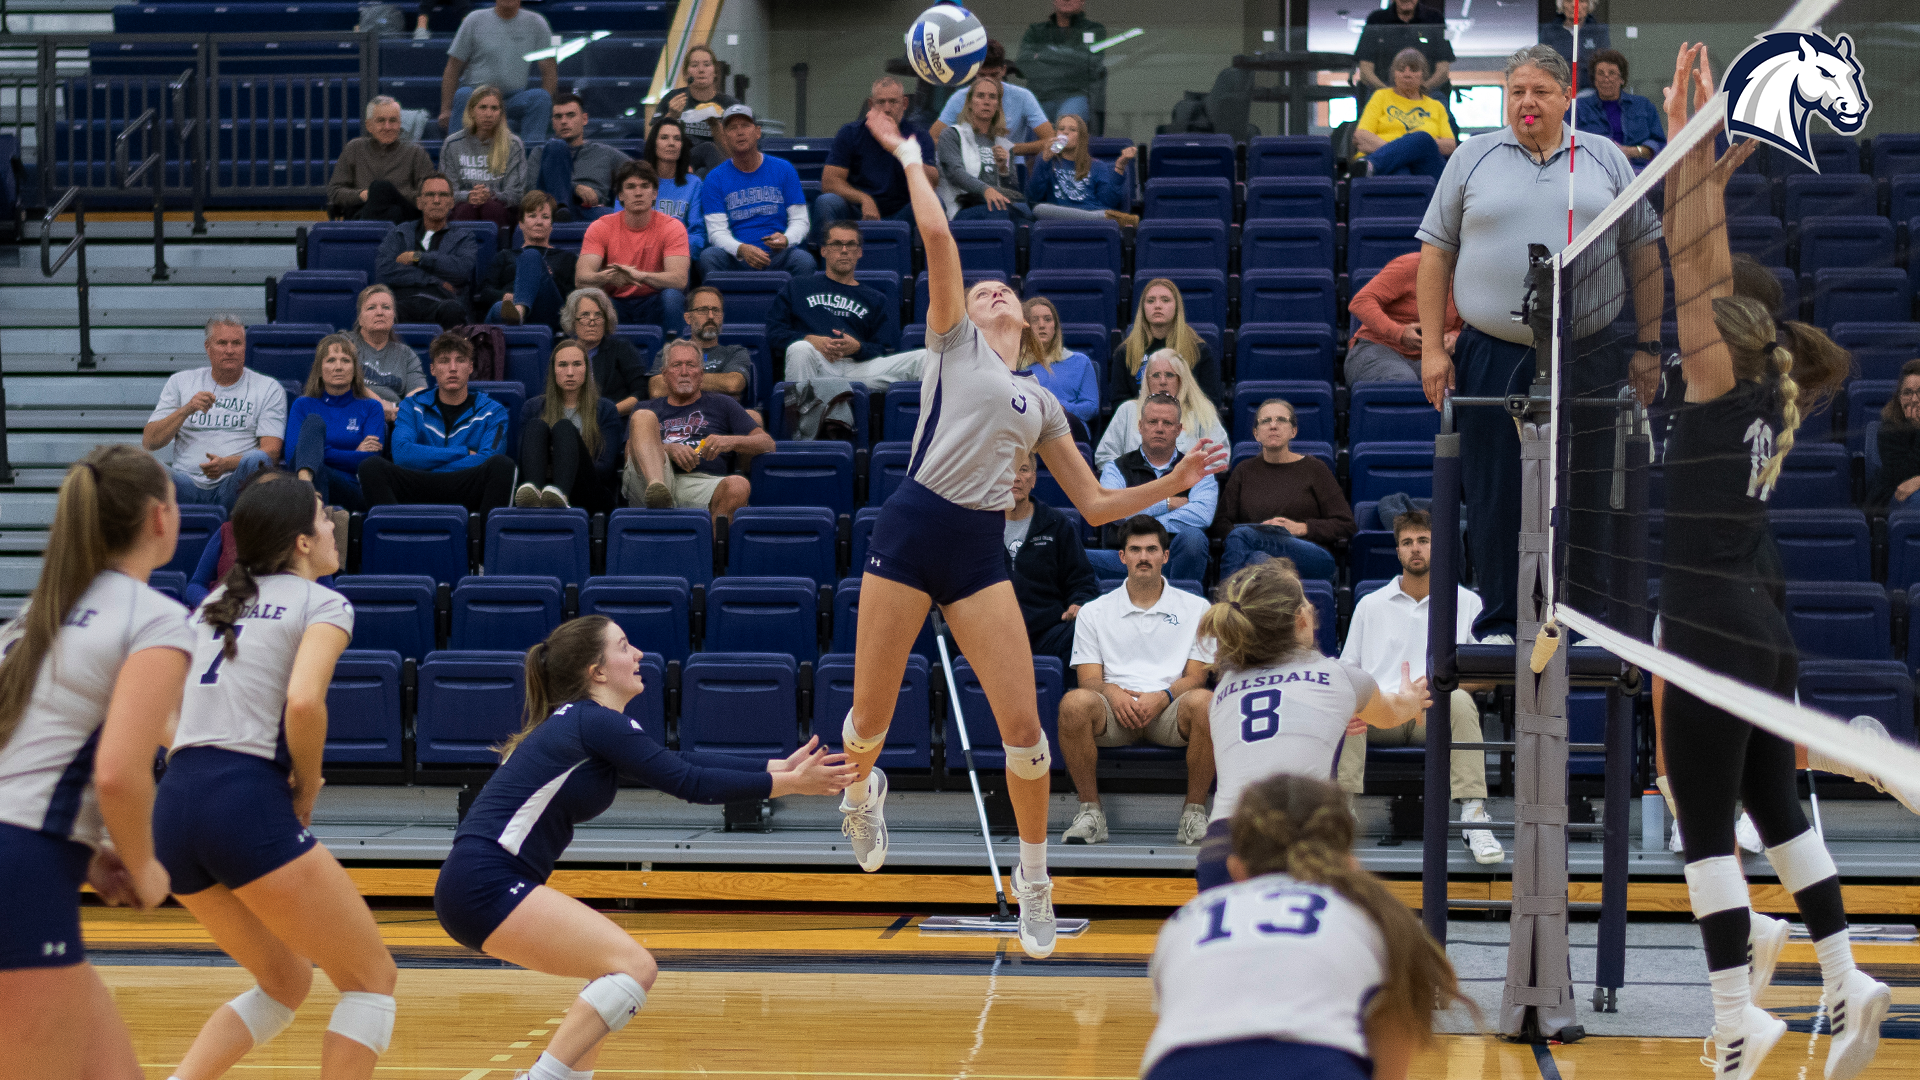 #22 Chargers continue streak of sweeps, top visiting Trevecca Nazarene